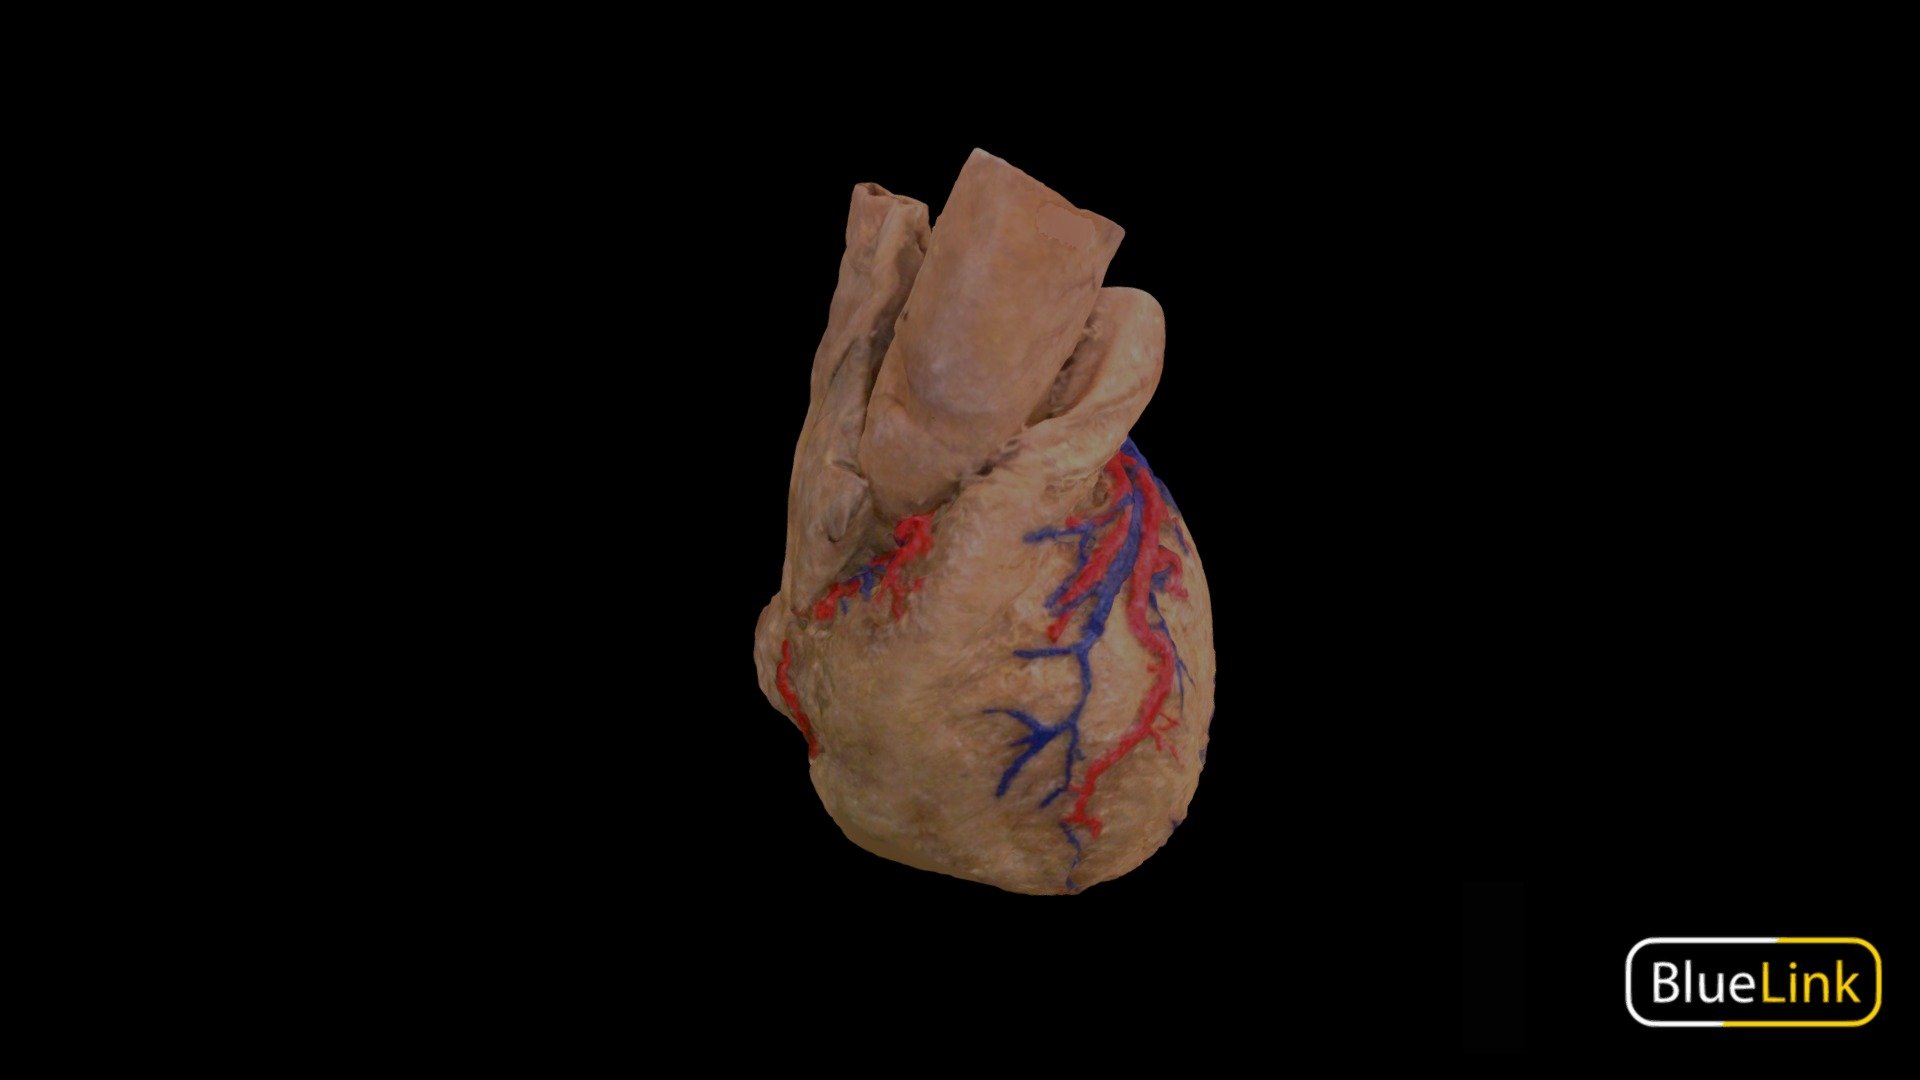 3D scan depicting the vascular supply of the human heart
Captured with: Einscan Pro
Captured by: Will Gribbin
Edited by: Cristina Prall
University of Michigan
21905-C01 - External Heart Vasculature - Labeled - 3D model by Bluelink Anatomy - University of Michigan (@bluelinkanatomy) 3d model